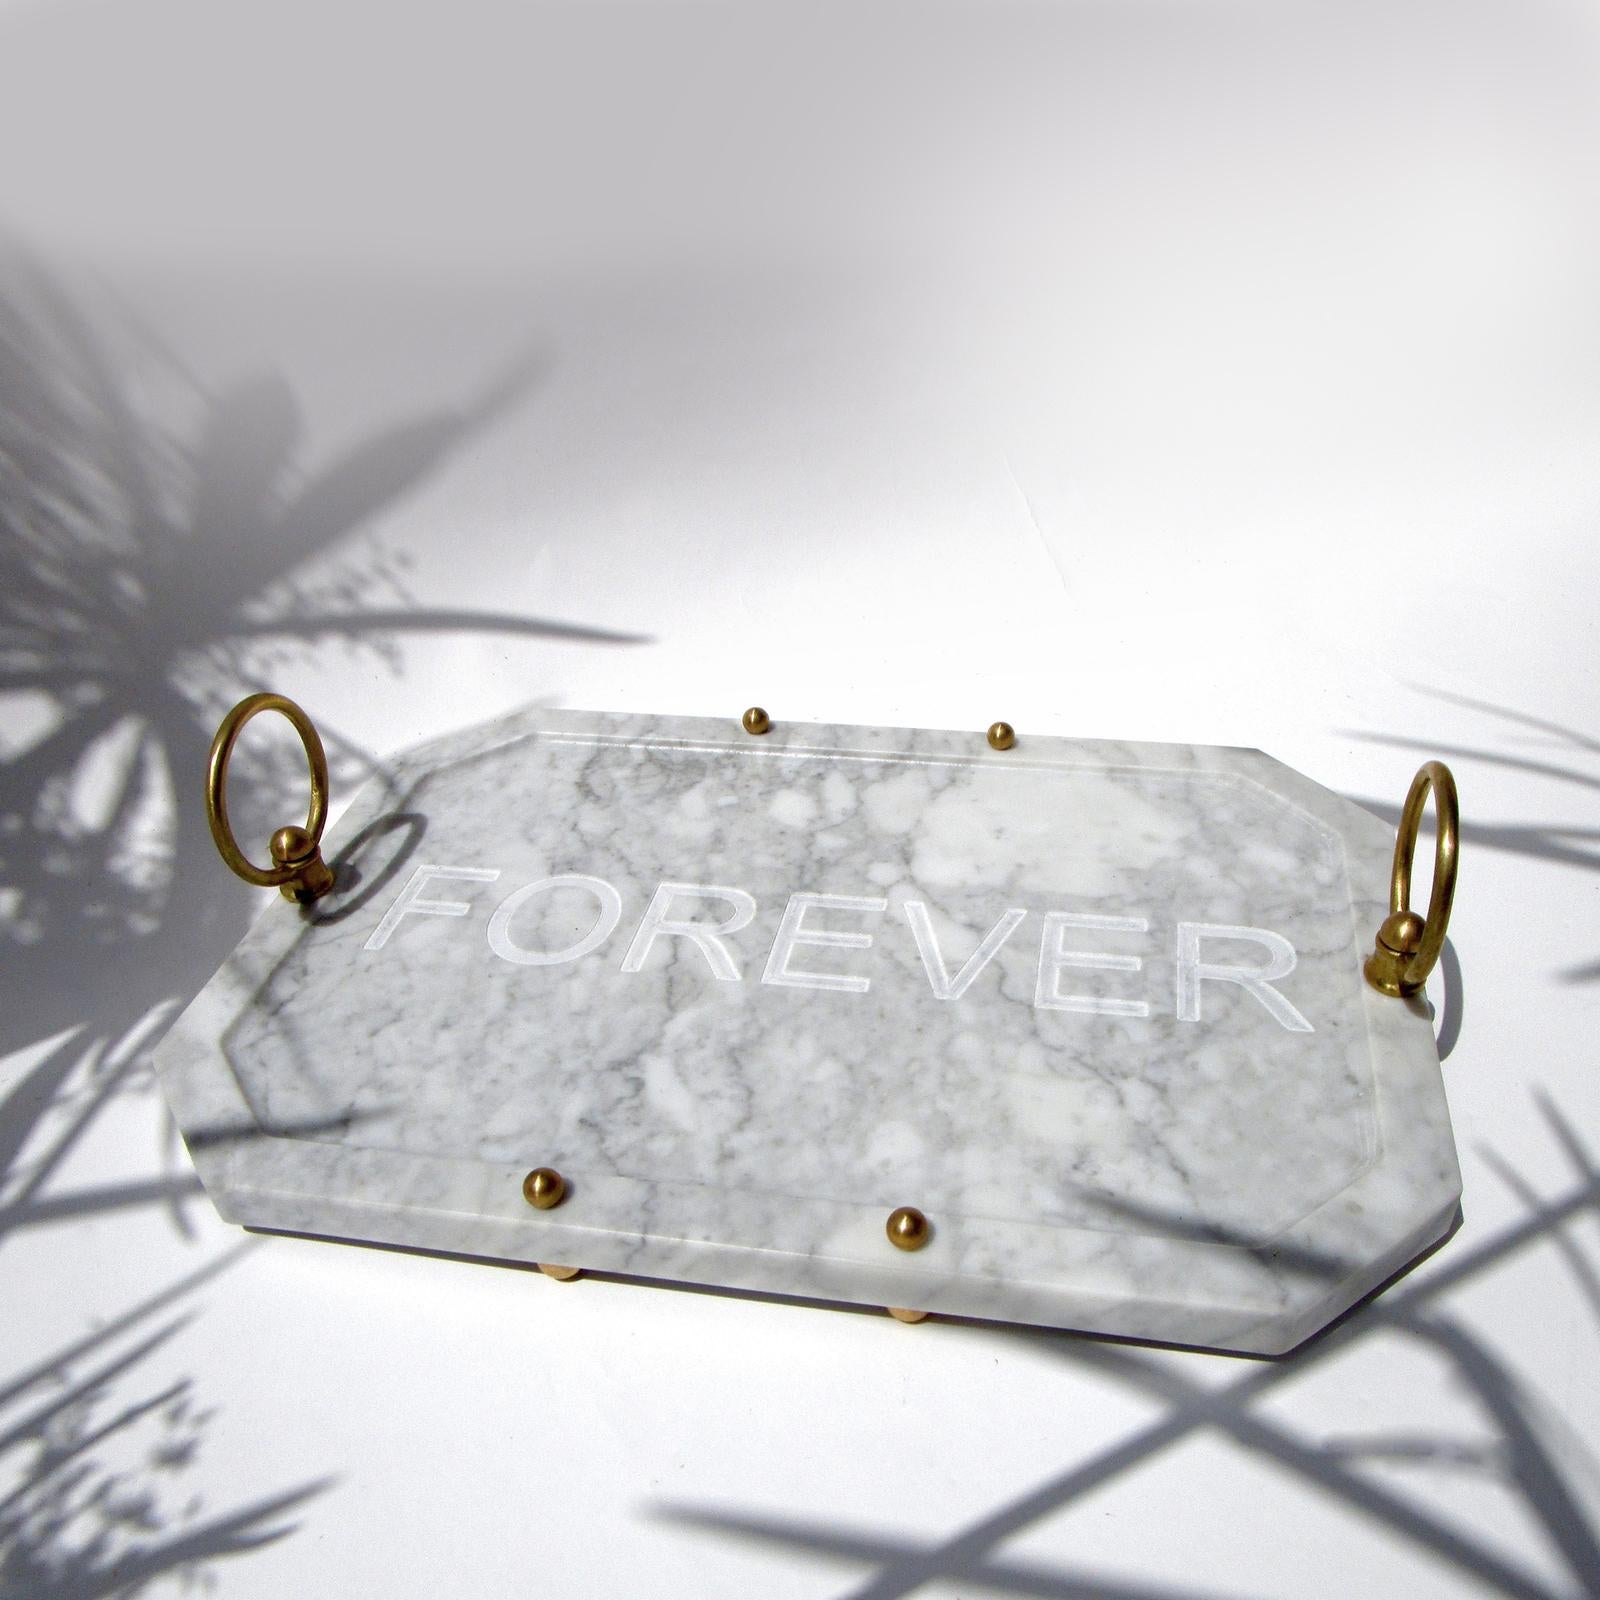 Modern Forever Tray by Nicola Falcone